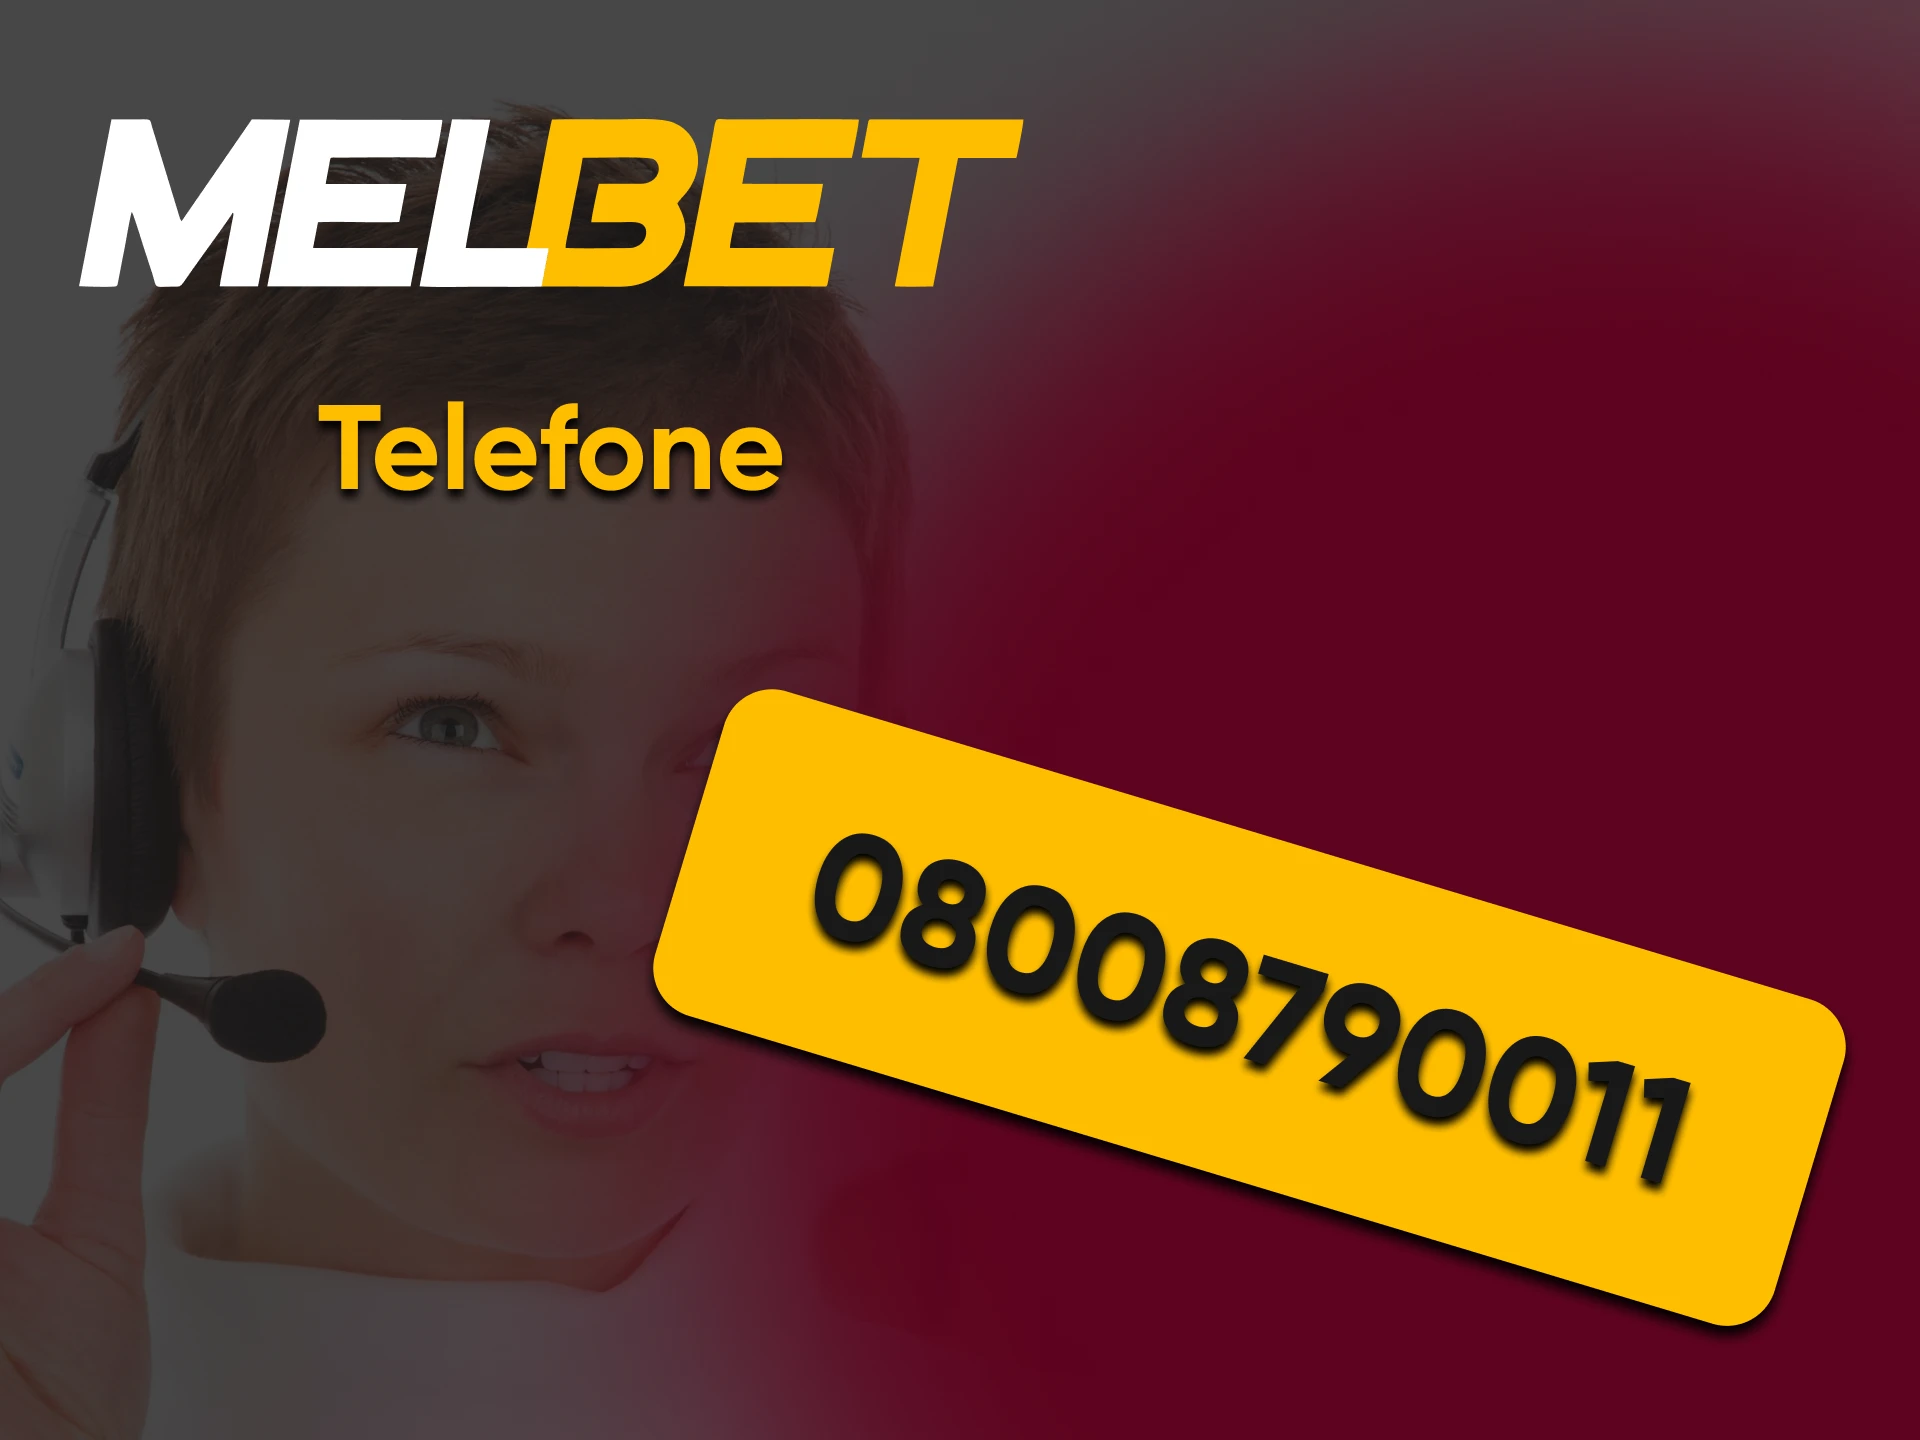 By mobile connection, you can also contact Melbet technical support.